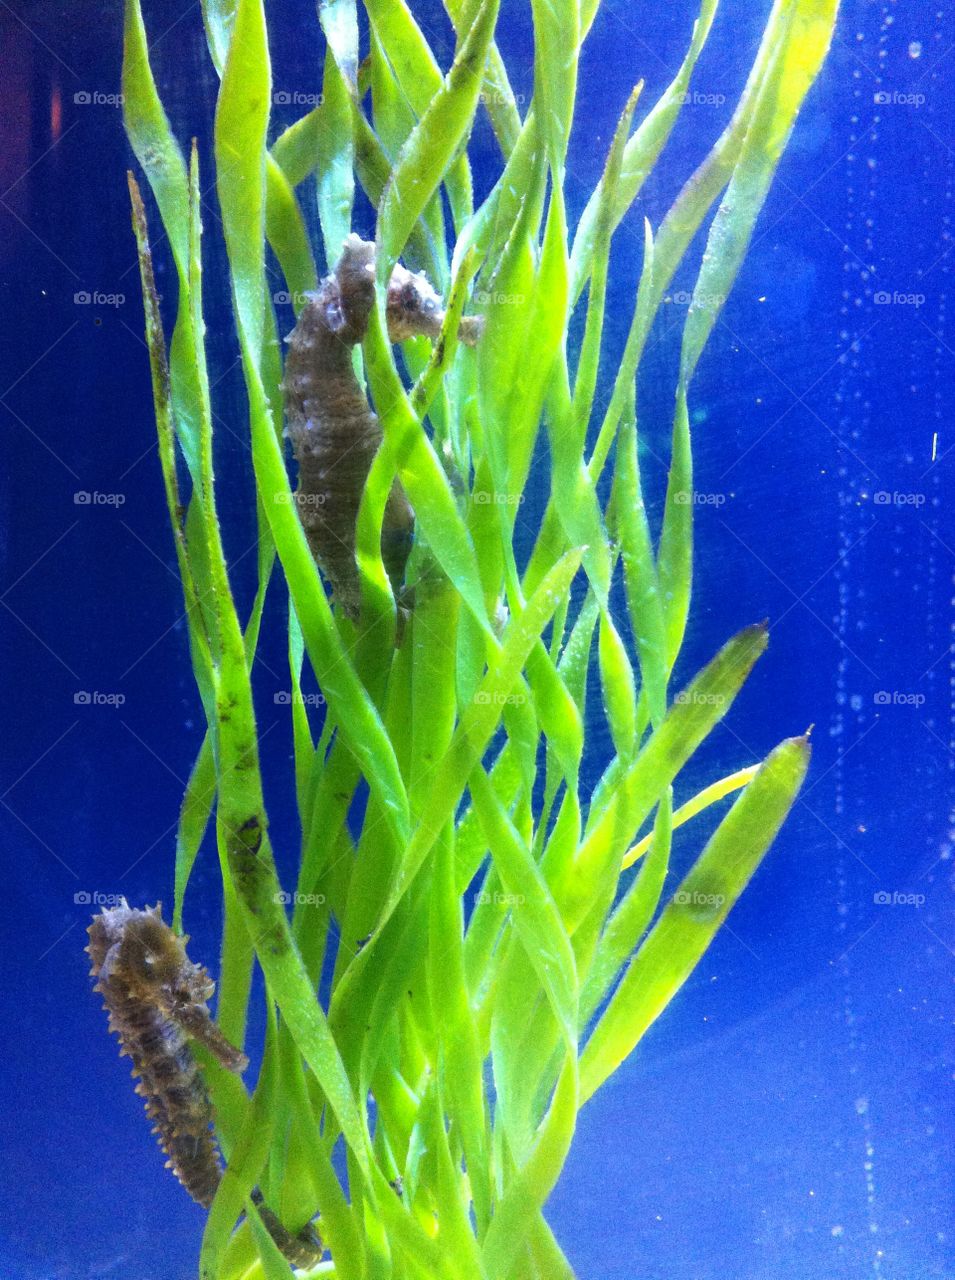 Seahorse exhibit at the zoo